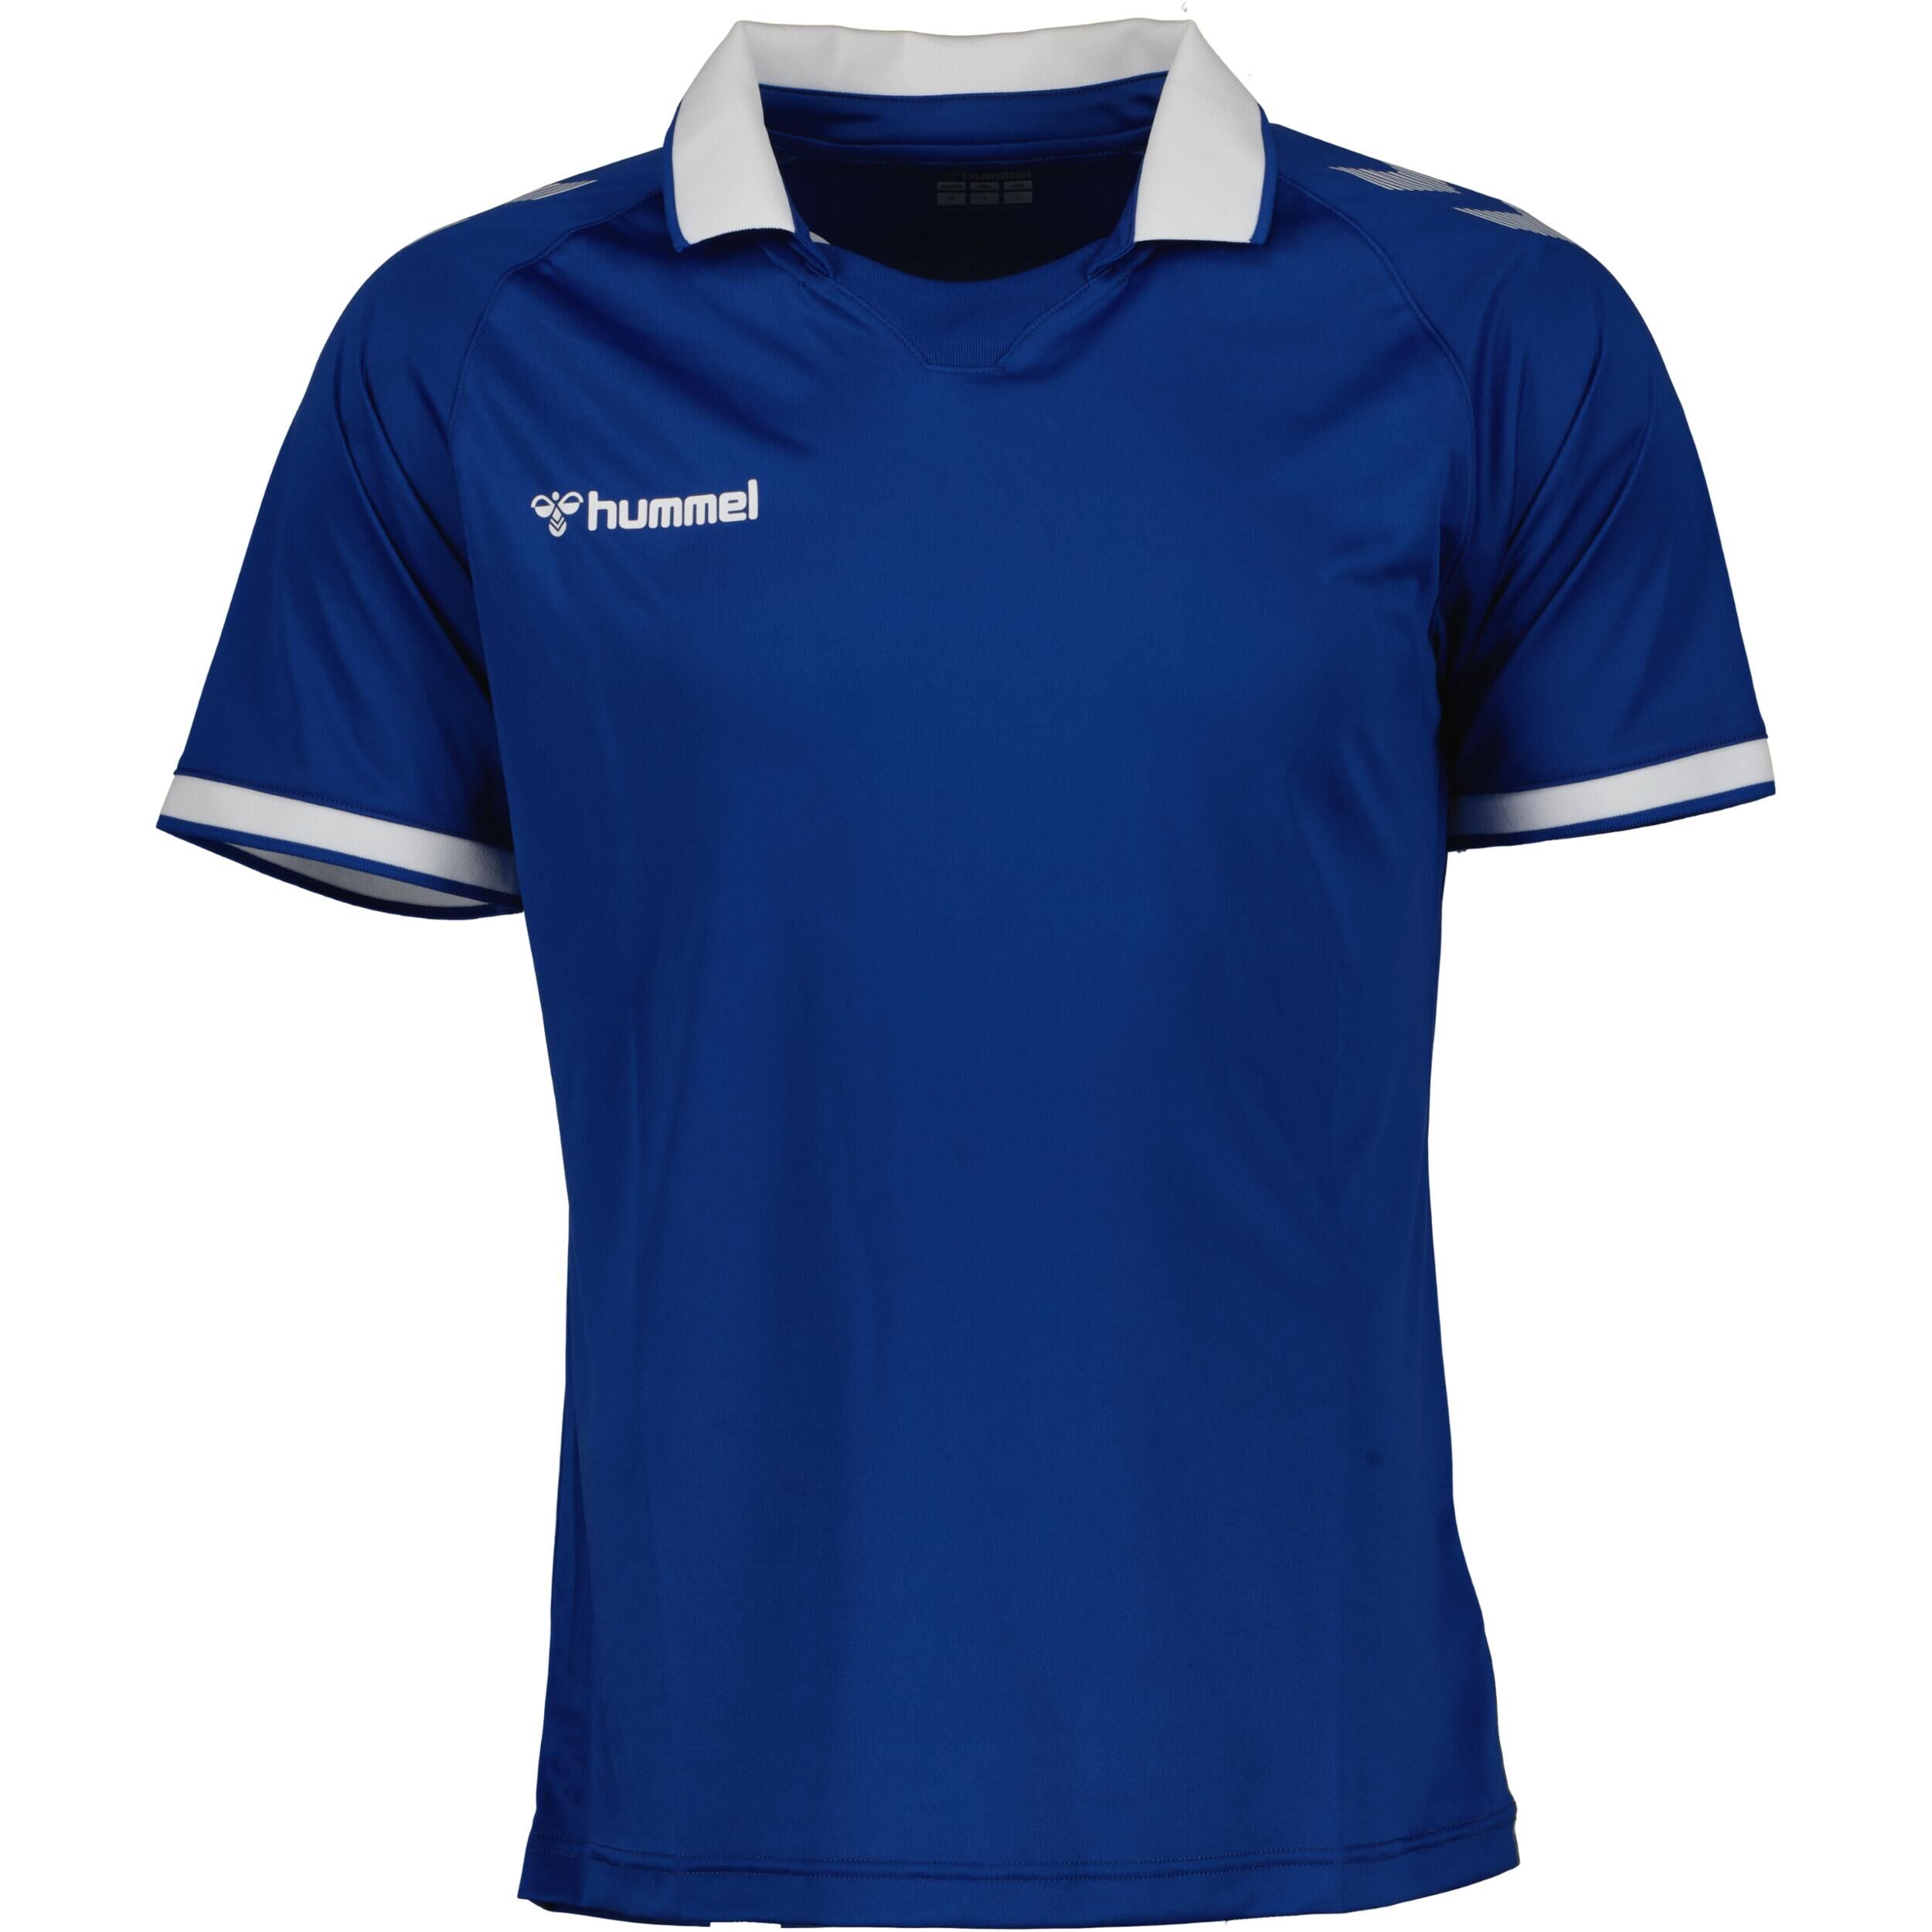 HUMMEL Impact jersey for men, great for football, in true blue/white